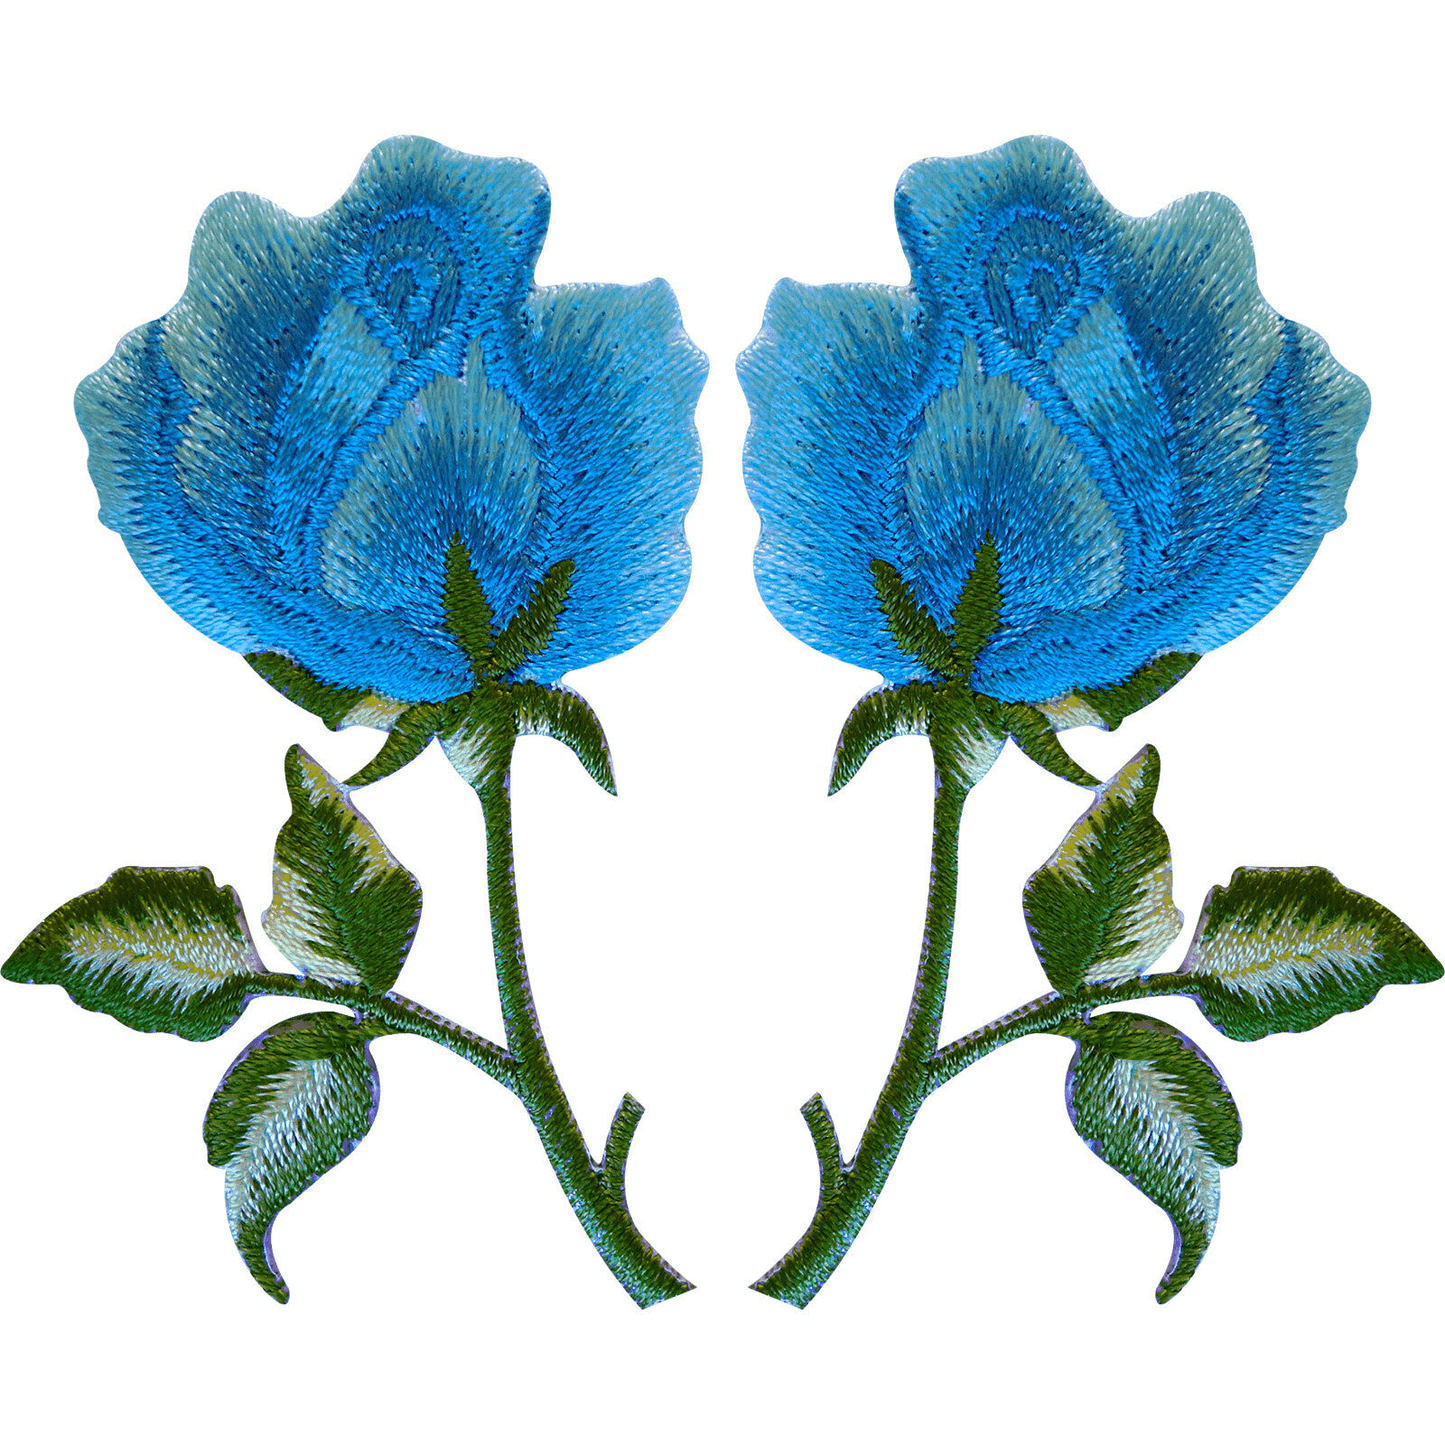 Pair of Blue Rose Patches Iron On Sew On Clothes Embroidered Flower Patch Badge